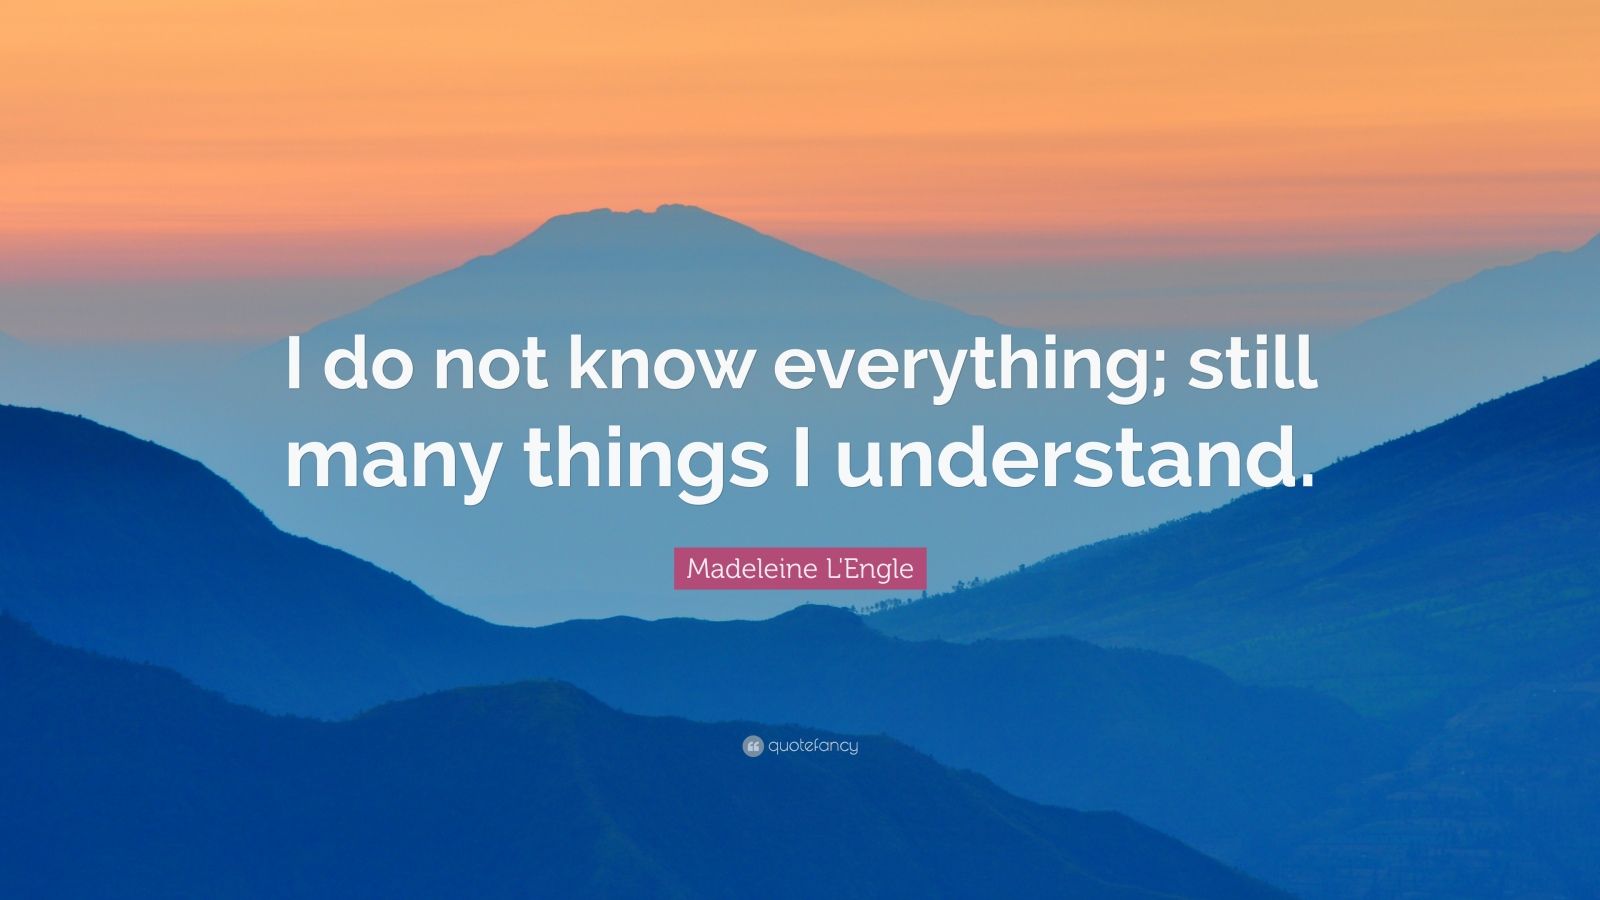 Madeleine L'Engle Quote: “I do not know everything; still many things I ...